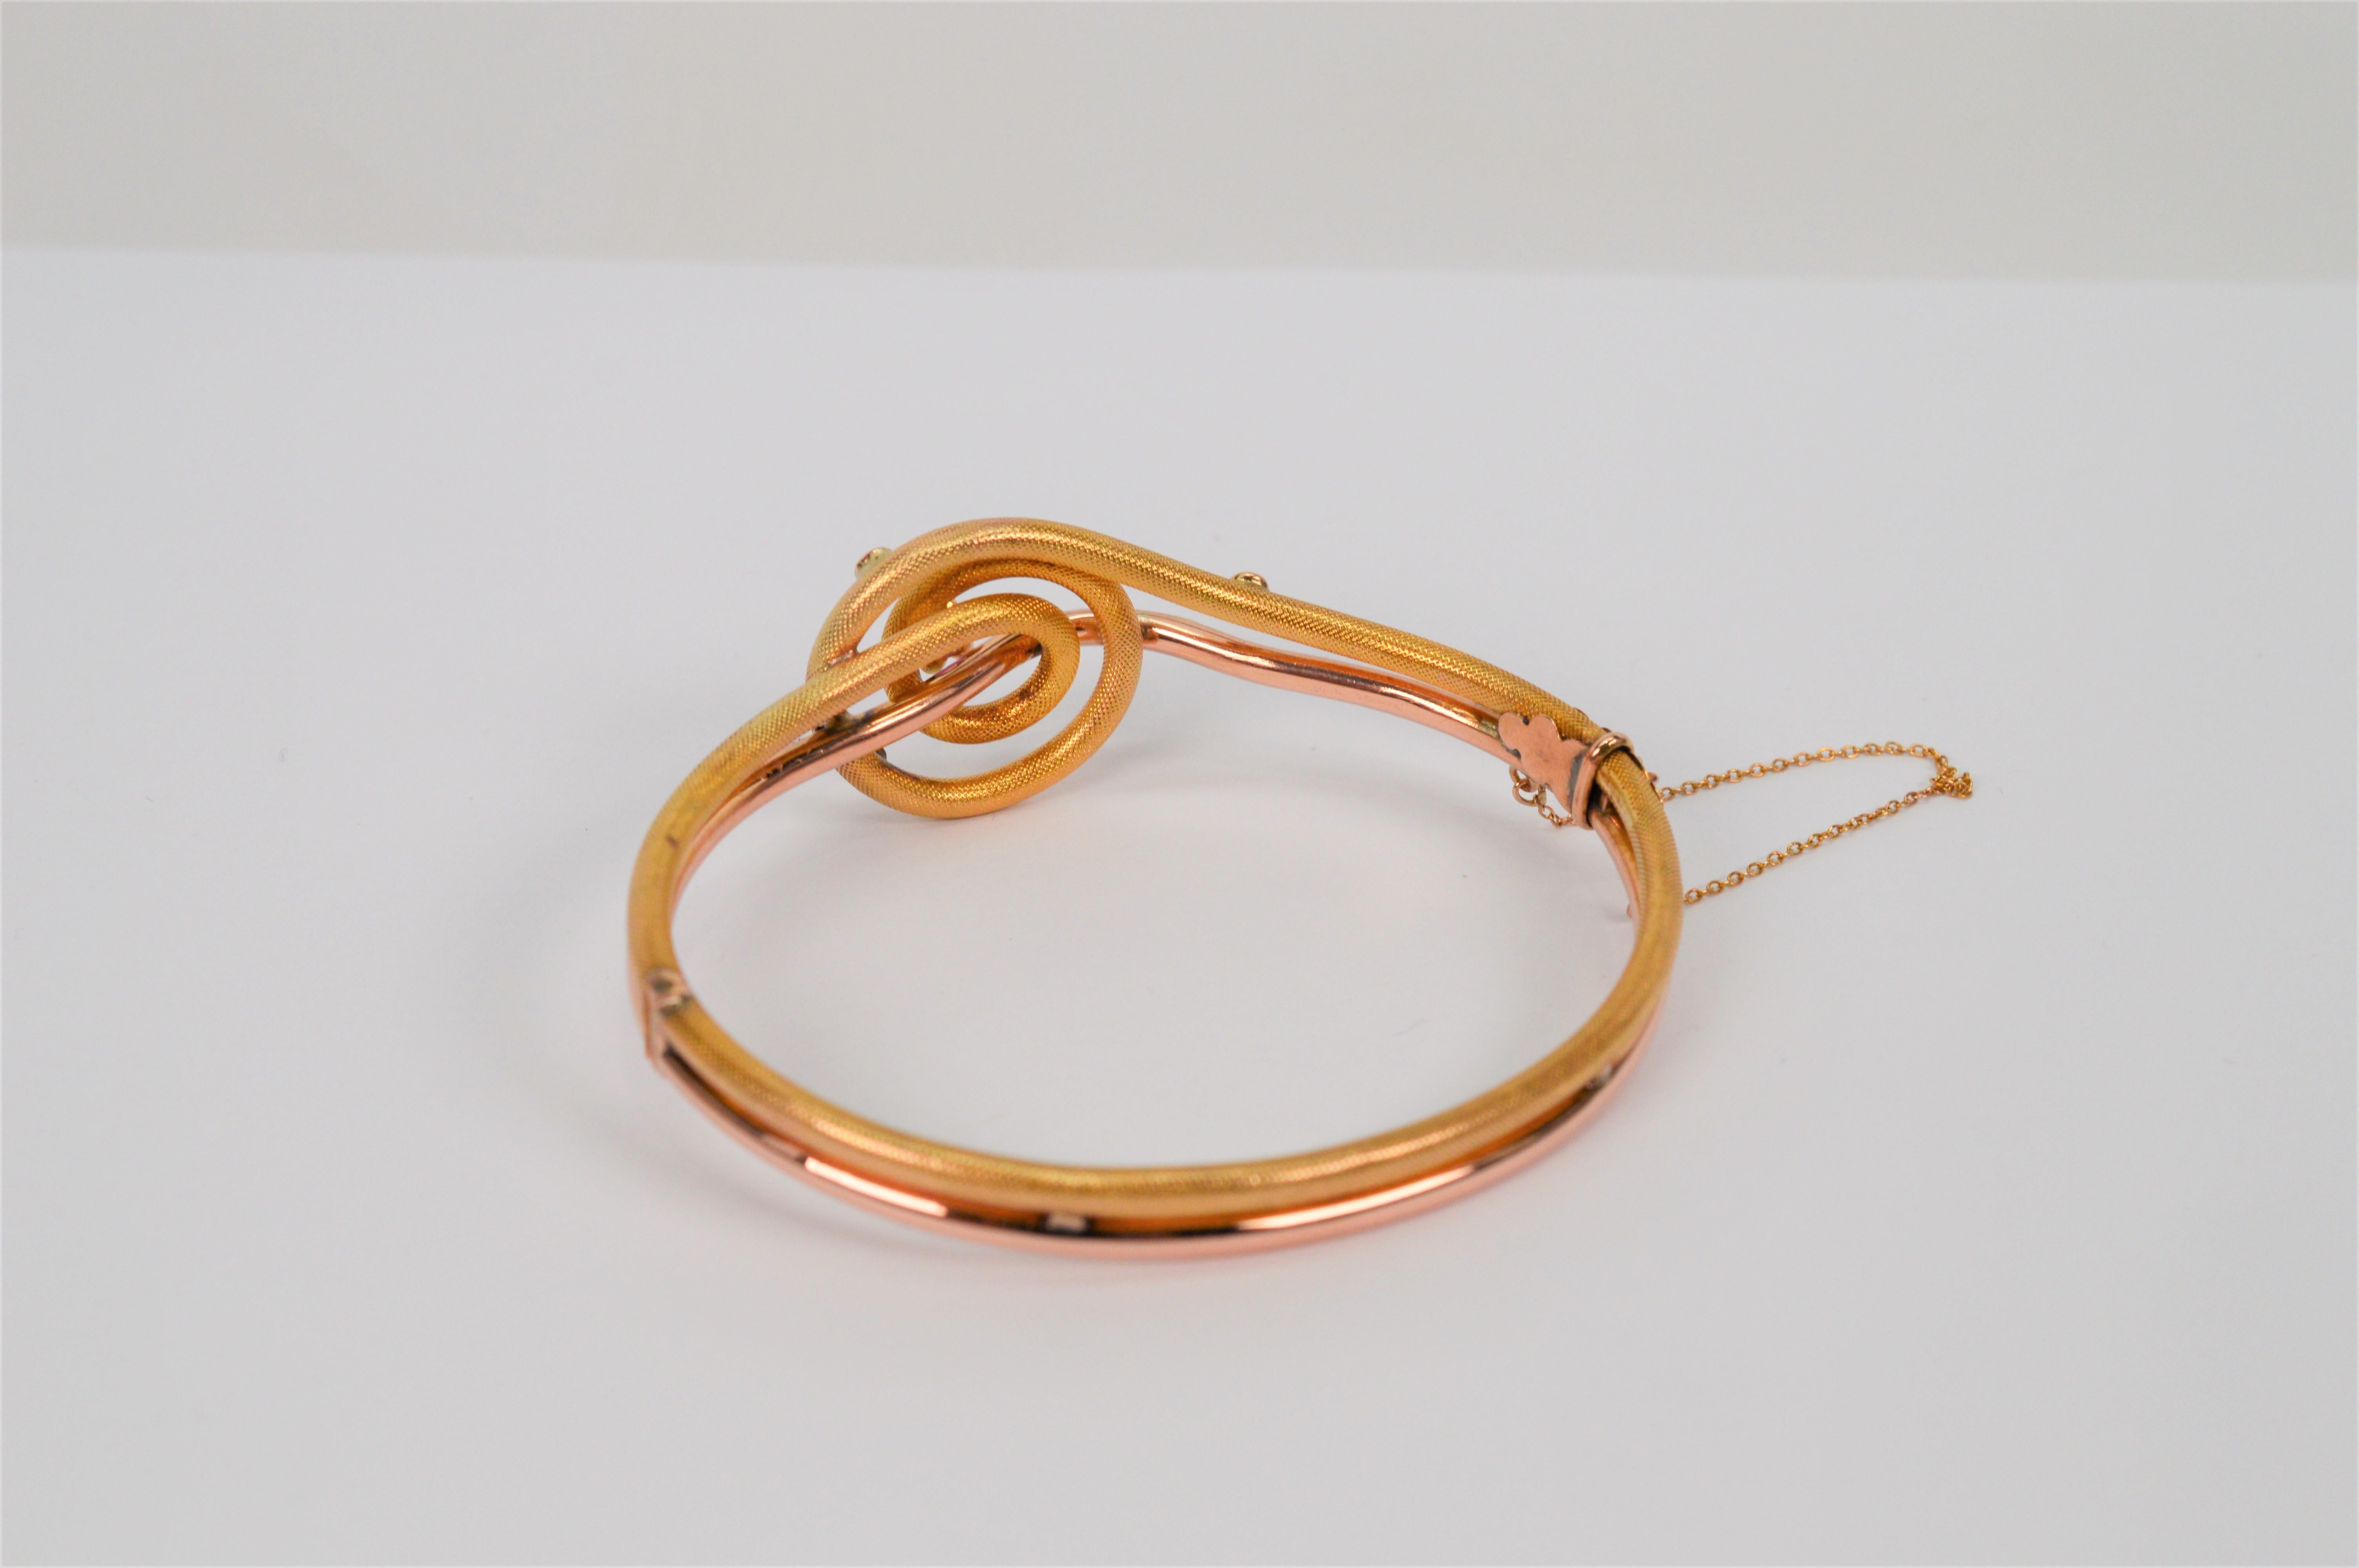 Vintage Yellow Rose Gold Bangle Bracelet with Gemstone Accents  For Sale 1